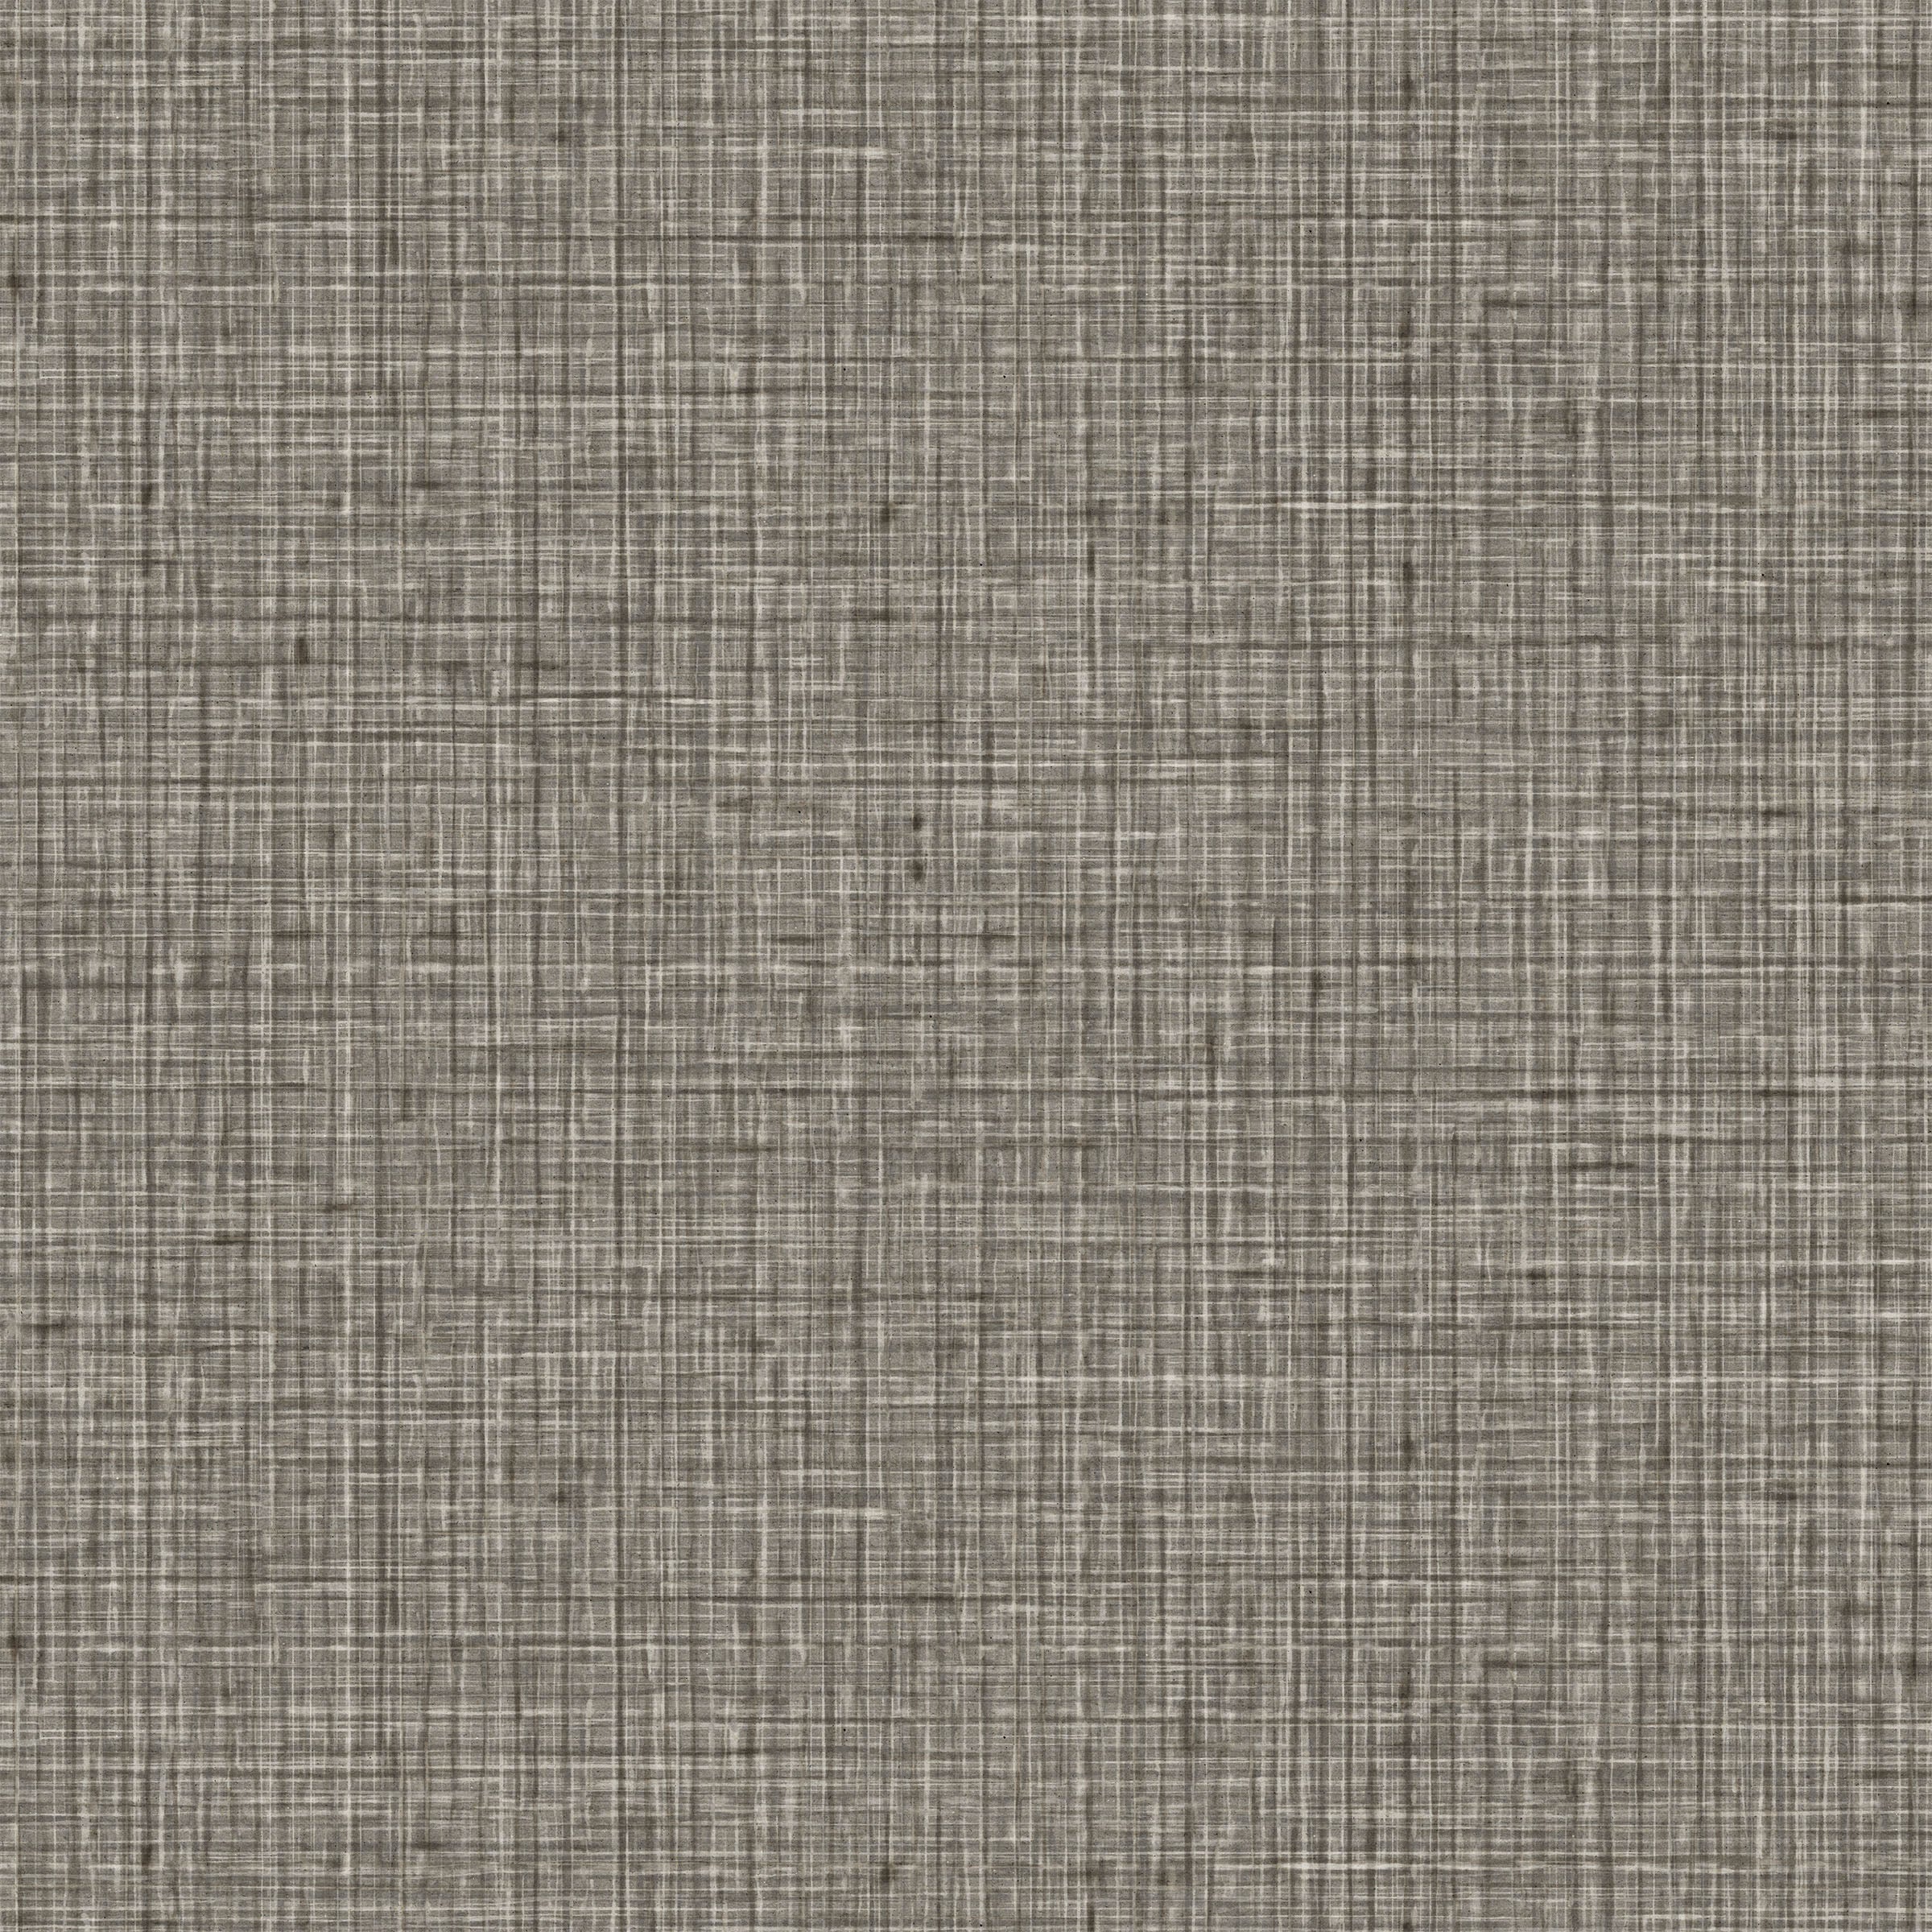 Detail of fabric in a textured tweed pattern in shades of gray.